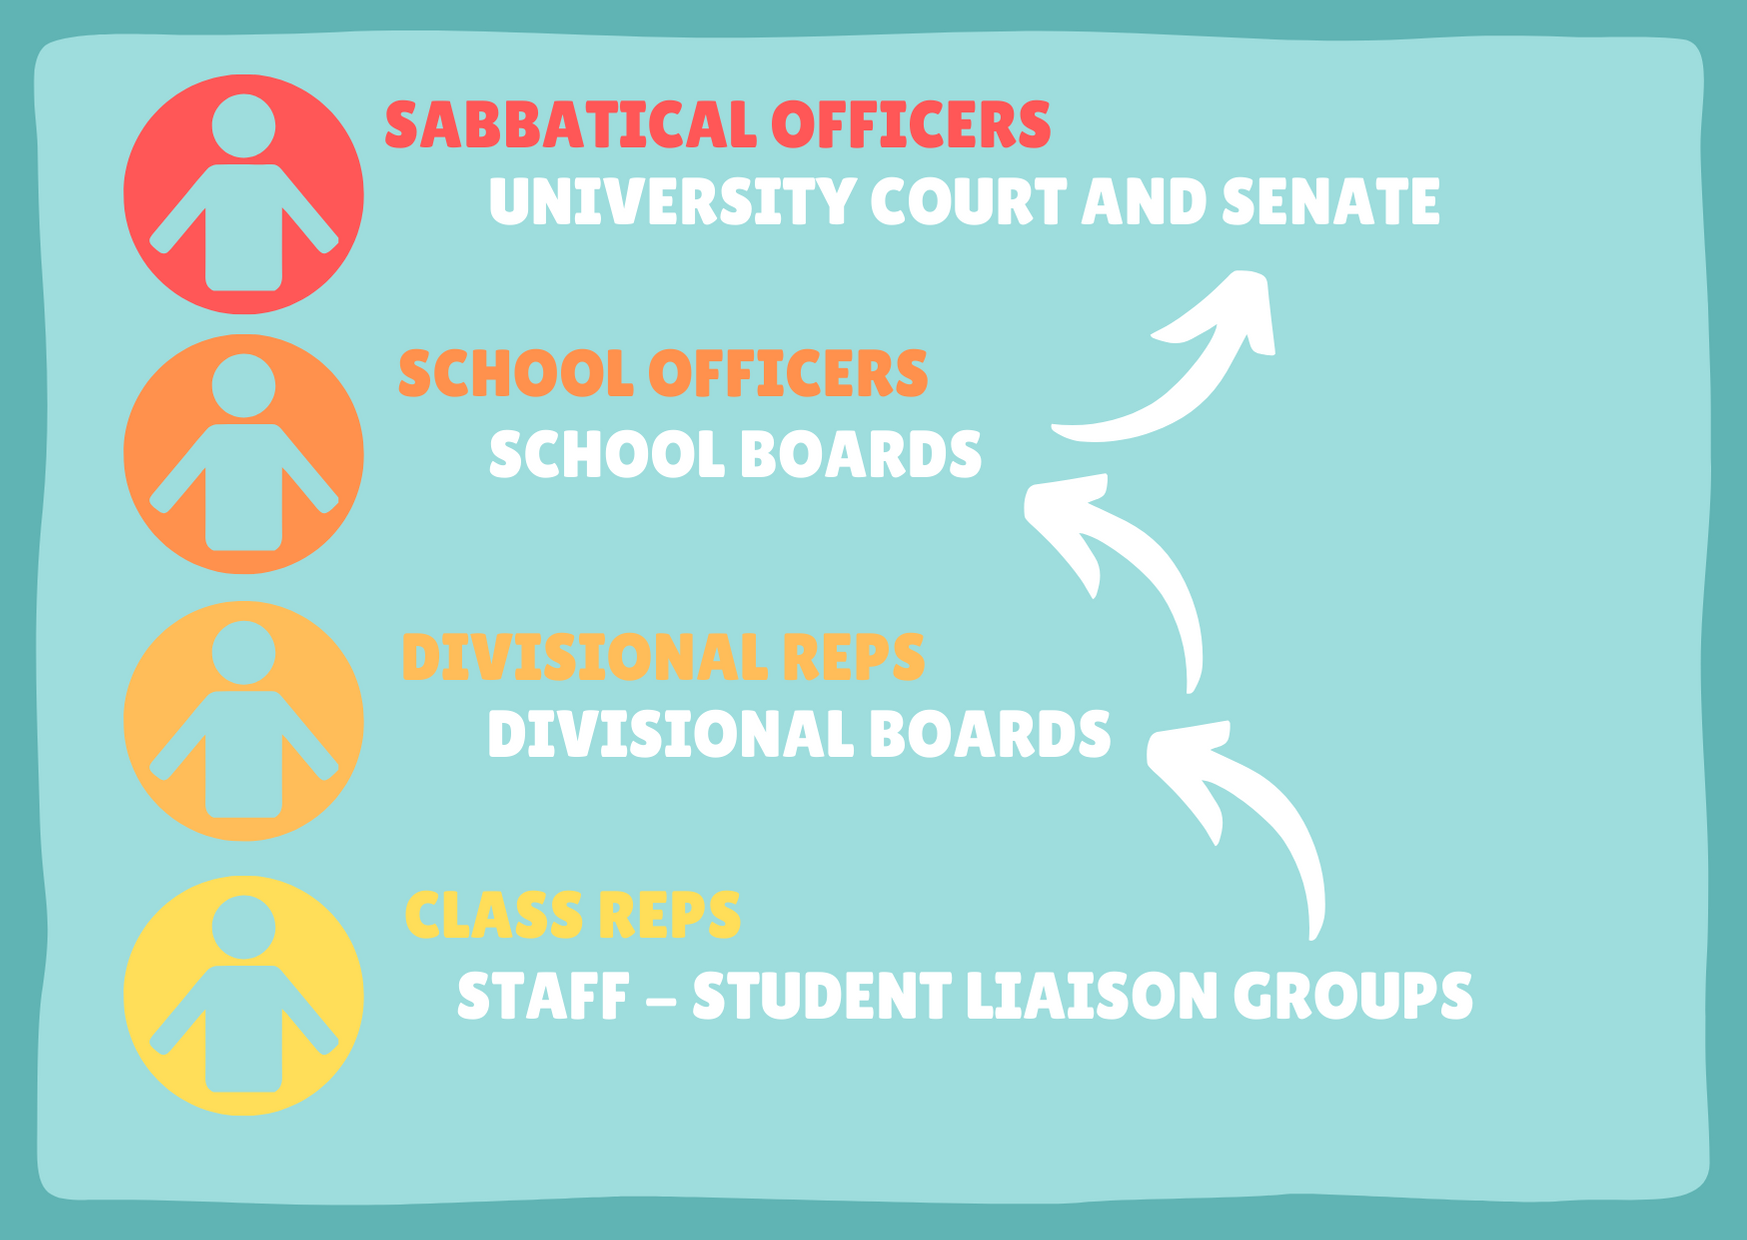 Graphic showing hierarchy of representation at UWS, from bottom to top: 1. Class Reps and Staff/Student Liaison groups; 2. Divisional Reps and Divisional Boards; 3. School Officers and School Boards; 4. Sabbatical Officers and University court and Senate